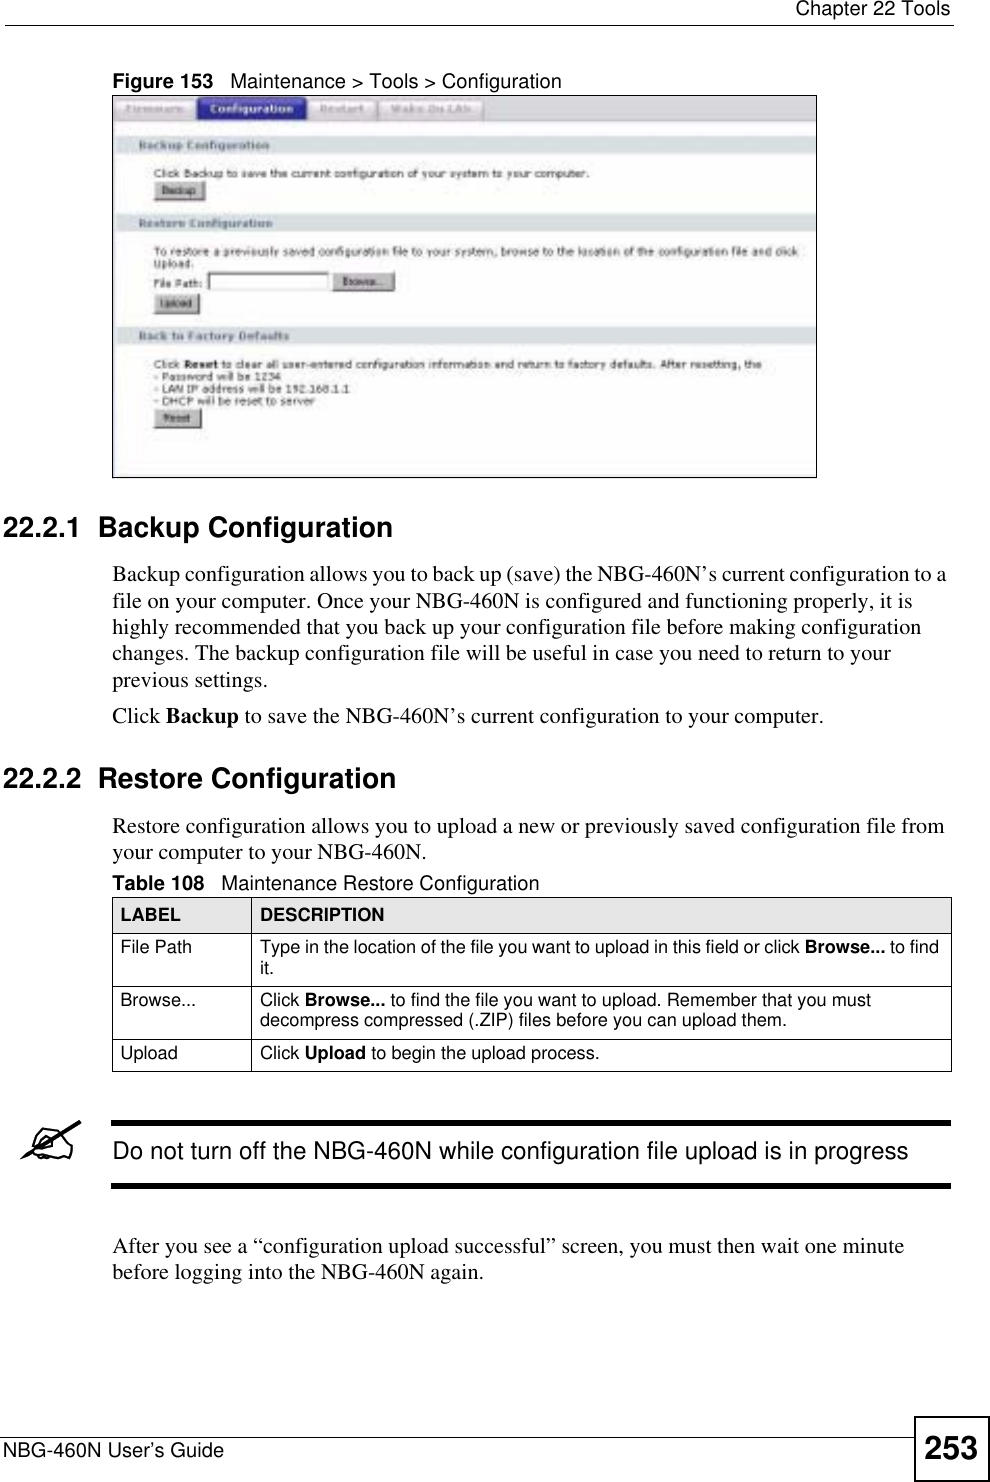  Chapter 22 ToolsNBG-460N User’s Guide 253Figure 153   Maintenance &gt; Tools &gt; Configuration 22.2.1  Backup ConfigurationBackup configuration allows you to back up (save) the NBG-460N’s current configuration to a file on your computer. Once your NBG-460N is configured and functioning properly, it is highly recommended that you back up your configuration file before making configuration changes. The backup configuration file will be useful in case you need to return to your previous settings. Click Backup to save the NBG-460N’s current configuration to your computer.22.2.2  Restore ConfigurationRestore configuration allows you to upload a new or previously saved configuration file from your computer to your NBG-460N.&quot;Do not turn off the NBG-460N while configuration file upload is in progressAfter you see a “configuration upload successful” screen, you must then wait one minute before logging into the NBG-460N again. Table 108   Maintenance Restore ConfigurationLABEL DESCRIPTIONFile Path  Type in the location of the file you want to upload in this field or click Browse... to find it.Browse...  Click Browse... to find the file you want to upload. Remember that you must decompress compressed (.ZIP) files before you can upload them. Upload  Click Upload to begin the upload process.